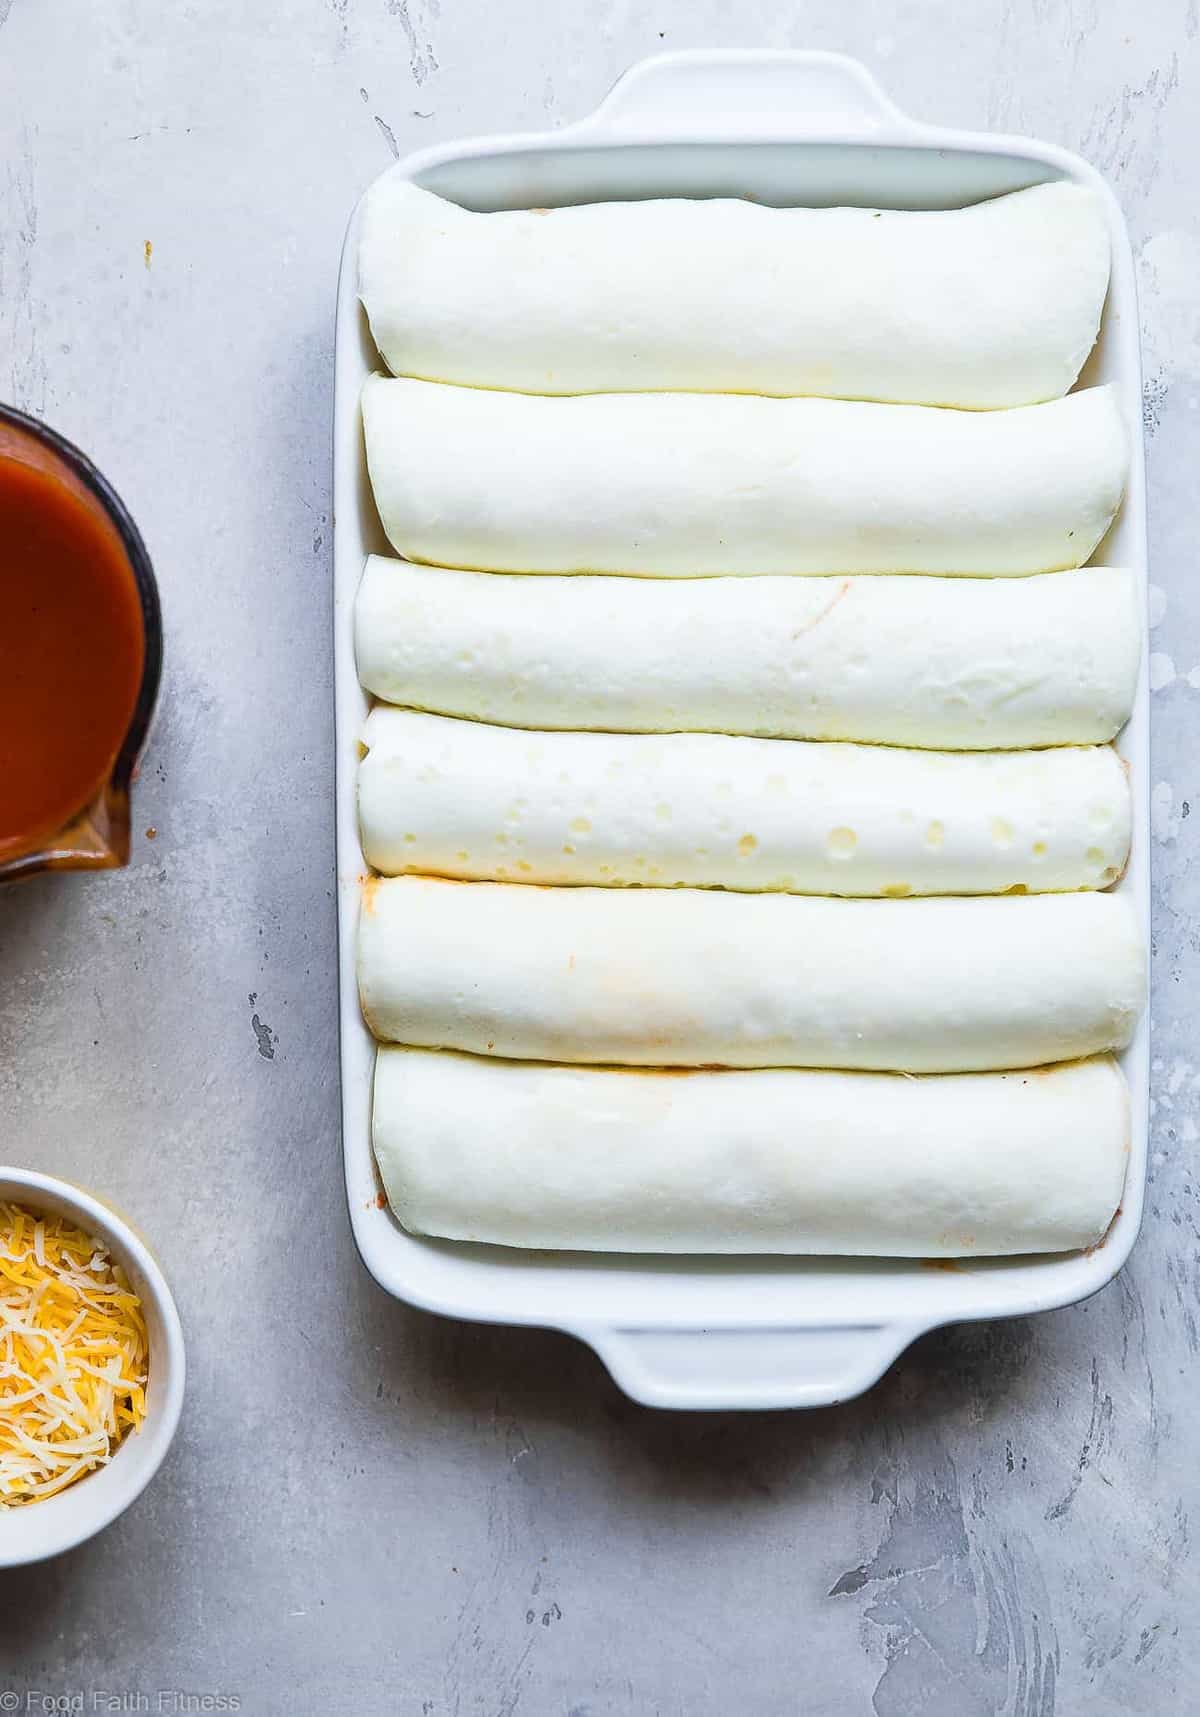 Healthy Low Carb Skinny Chicken Enchiladas - This gluten free Healthy Low Carb Chicken Enchilada Recipe uses a secret ingredient to make it low carb, protein PACKED and under 500 calories for a HUGE serving! These do NOT taste healthy and even picky eaters love them! | #Foodfaithfitness | #Lowcarb #Glutenfree #Healthy #Grainfree #Enchiladas 